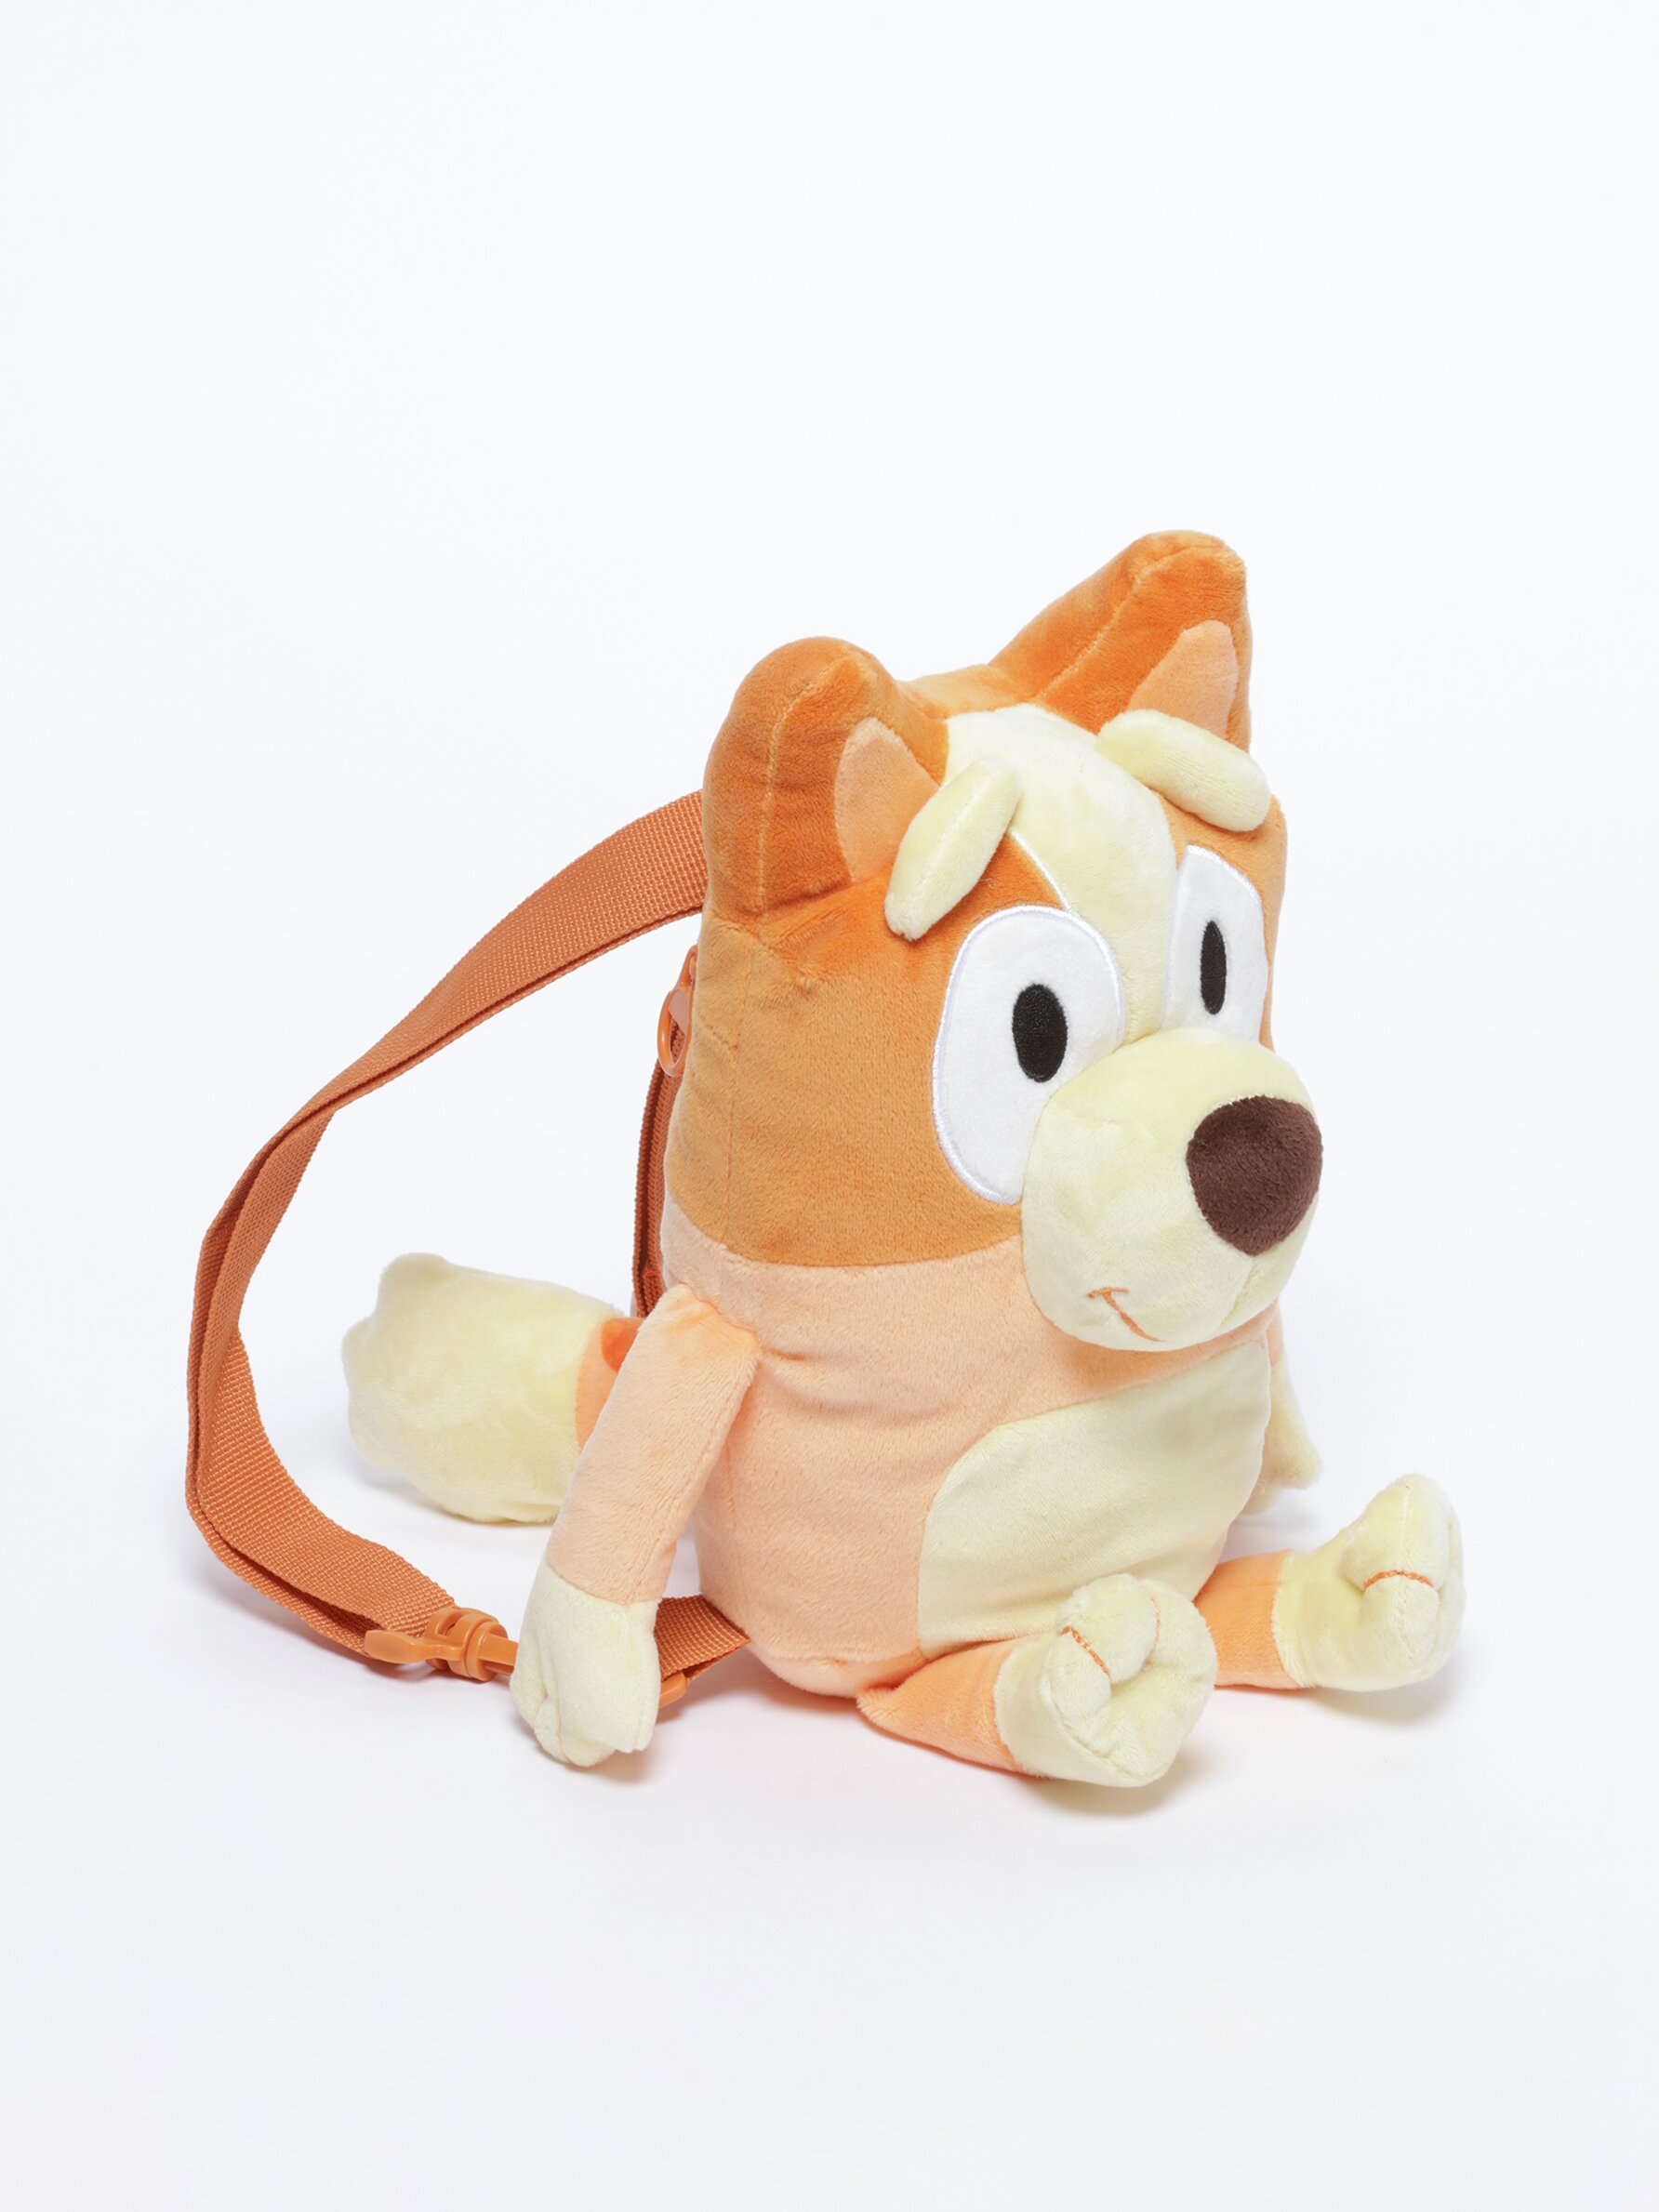 Bingo from BLUEY plush backpack - Collabs - CLOTHING - Boy - Kids 